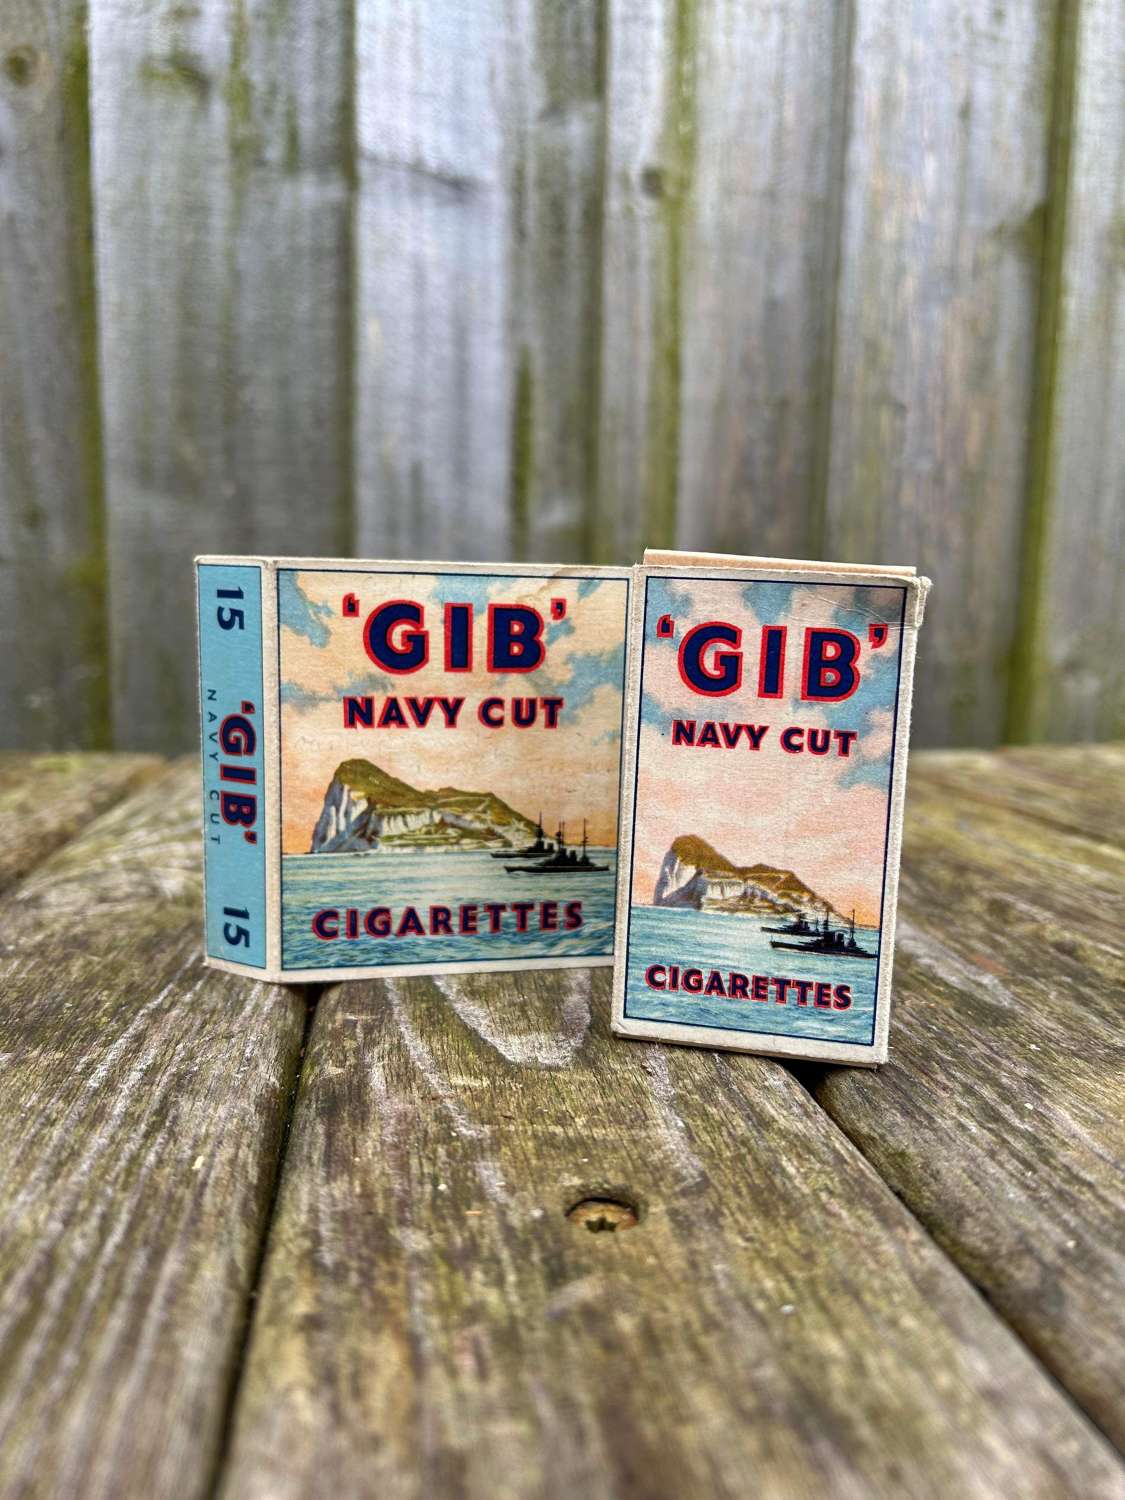 Pair of gib cigarette packets